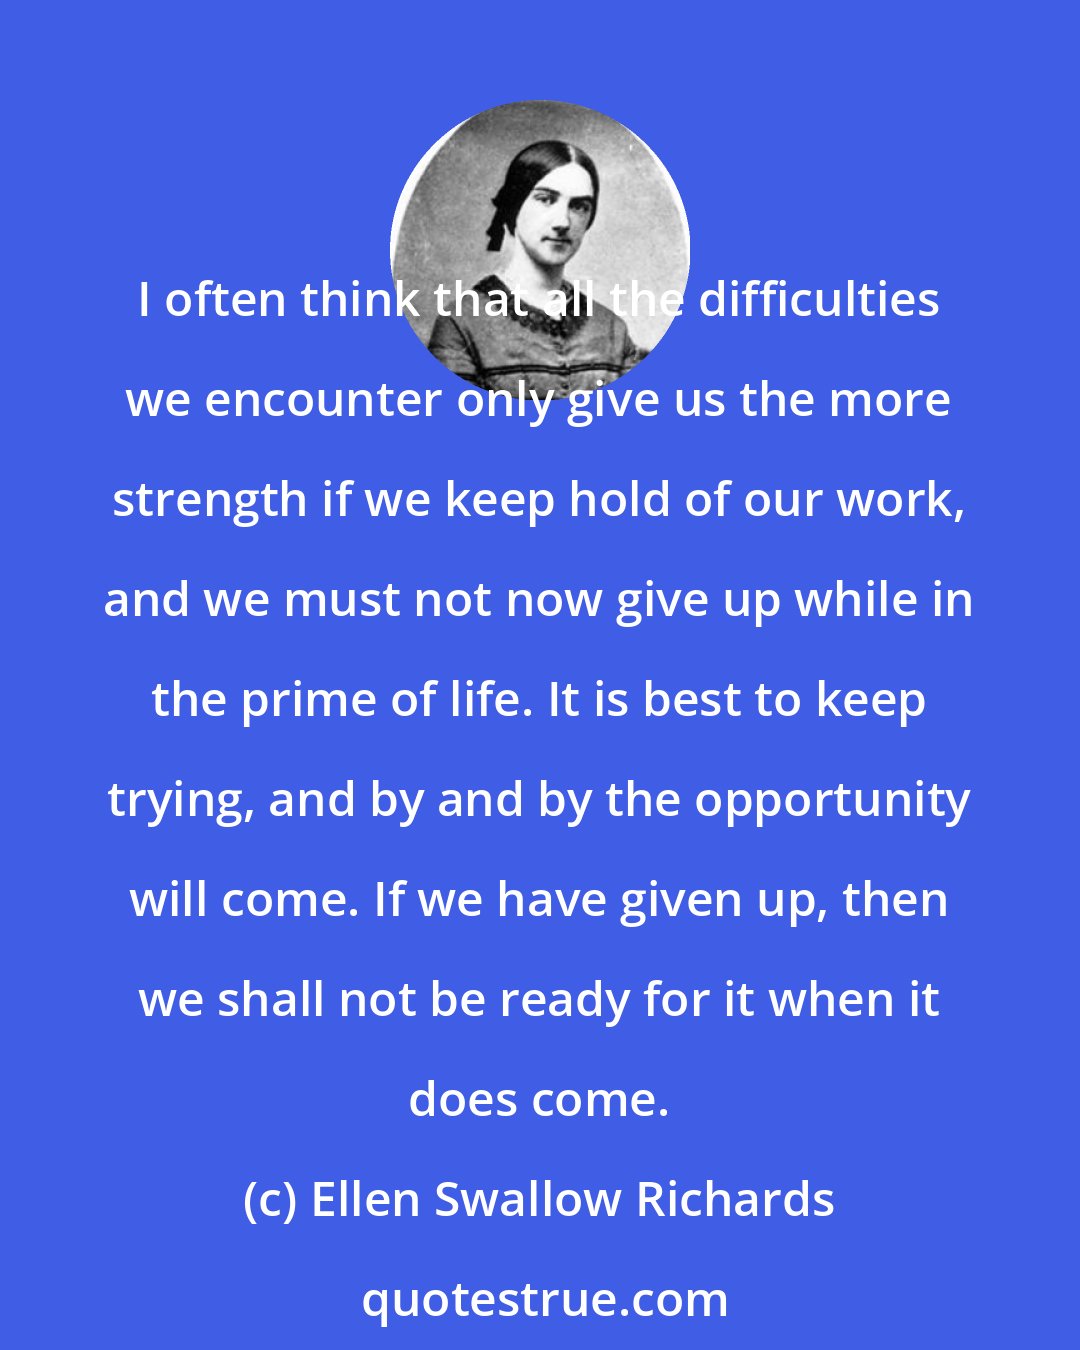 Ellen Swallow Richards: I often think that all the difficulties we encounter only give us the more strength if we keep hold of our work, and we must not now give up while in the prime of life. It is best to keep trying, and by and by the opportunity will come. If we have given up, then we shall not be ready for it when it does come.